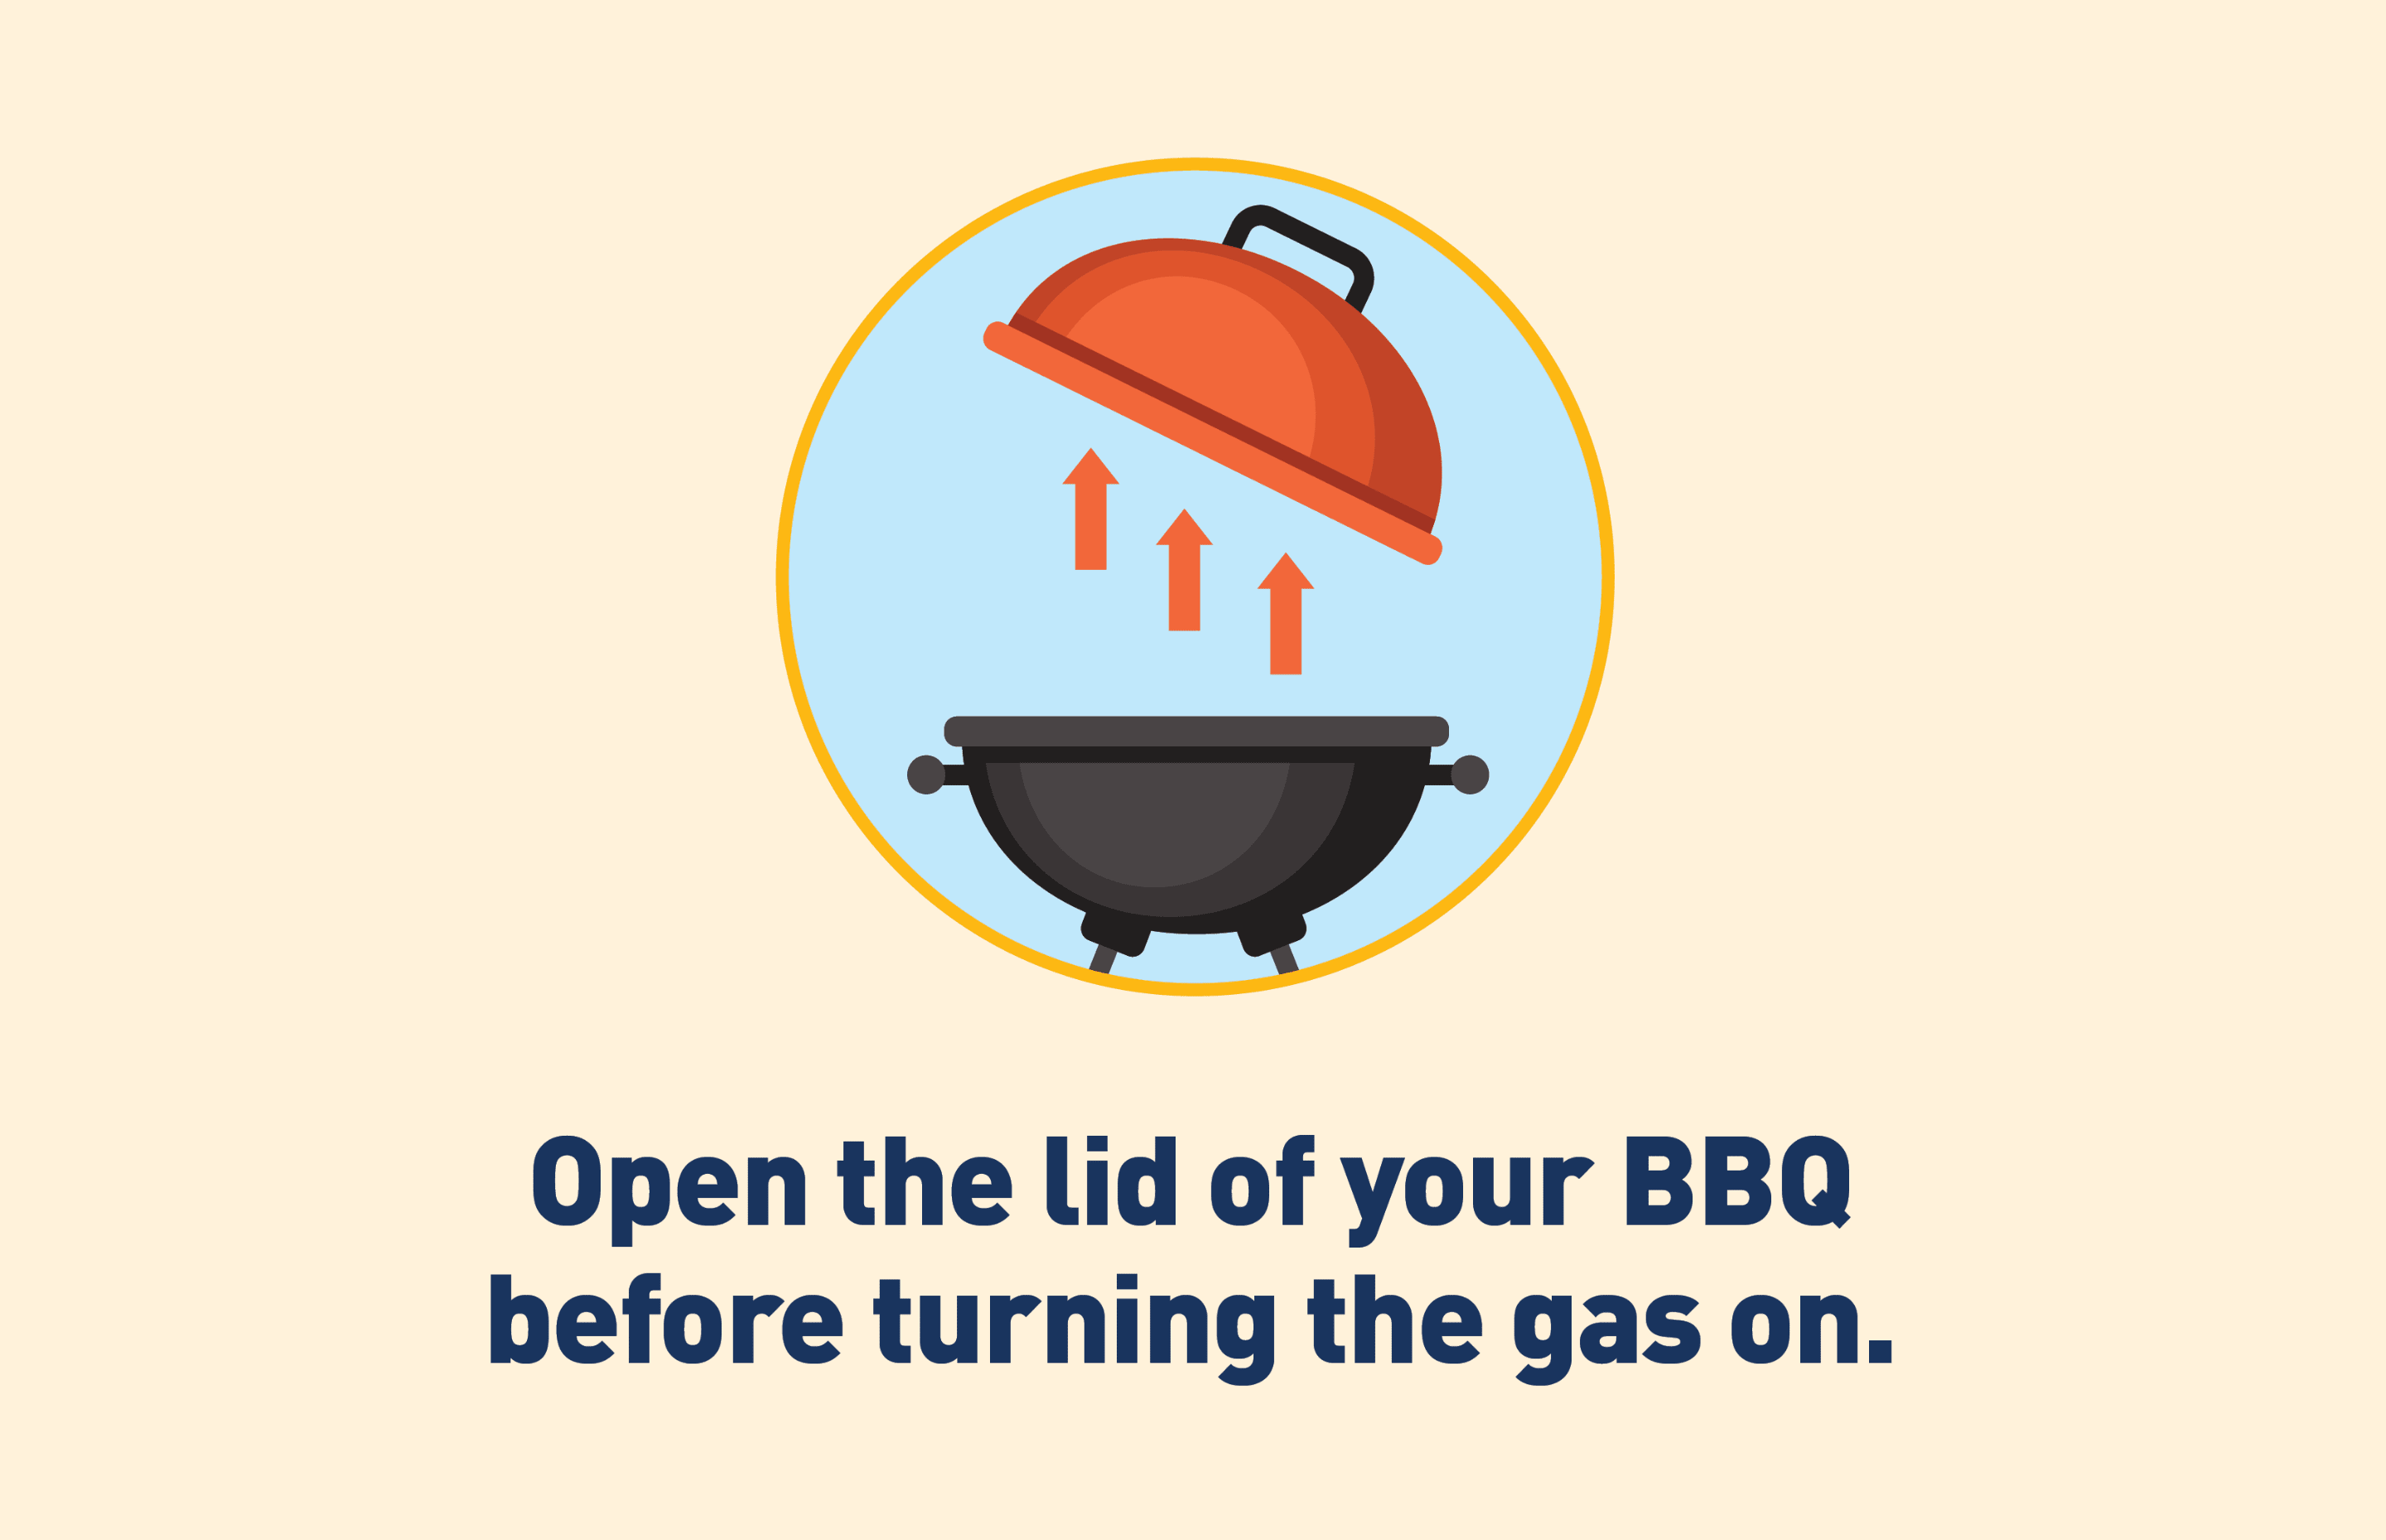 Image Description: Graphic of barbecue with open lid. Text: Open the lid of your BBQ before turning the gas on.